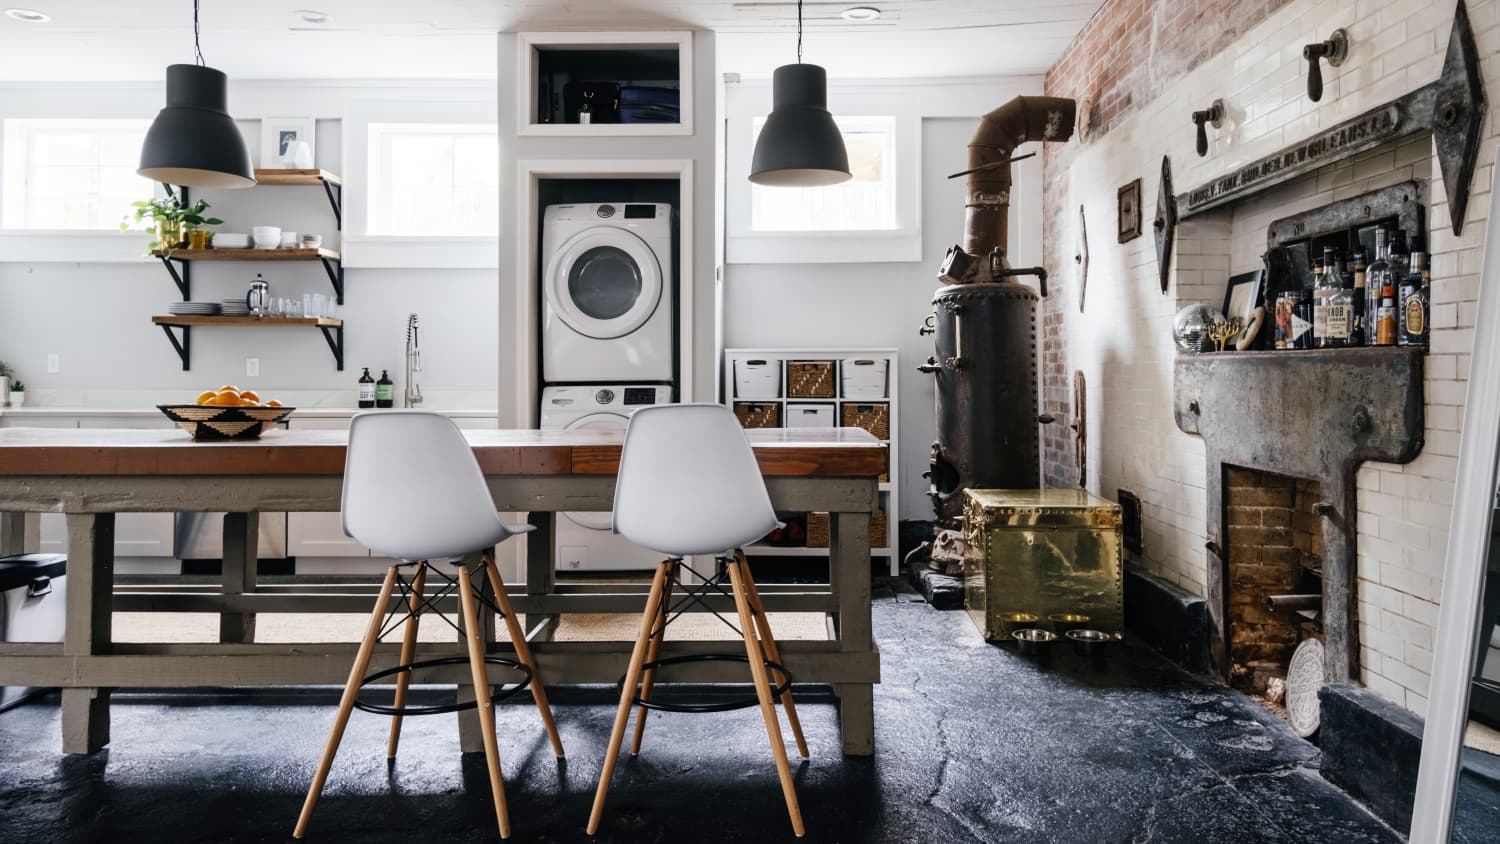 Choosing the Perfect Washer and Dryer for Apartment